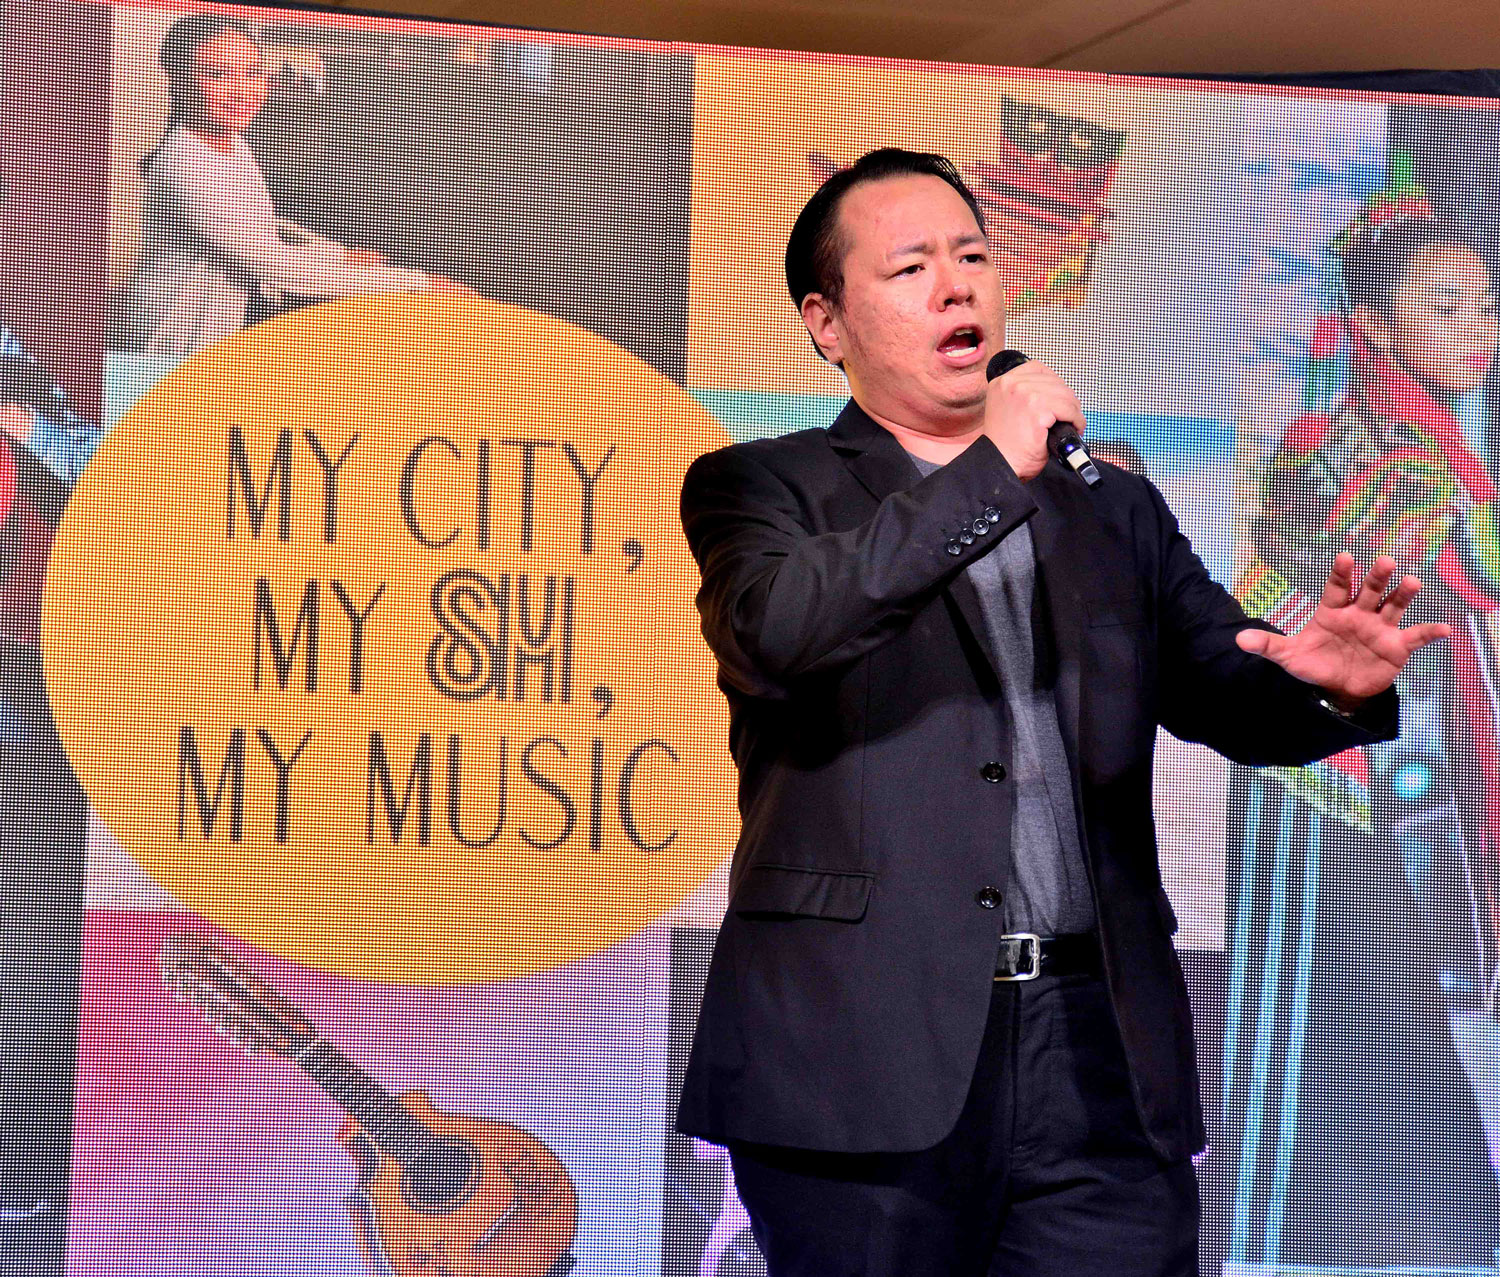 Fides Cuyugan Asensio's Musical Odyssey — Positively Filipino